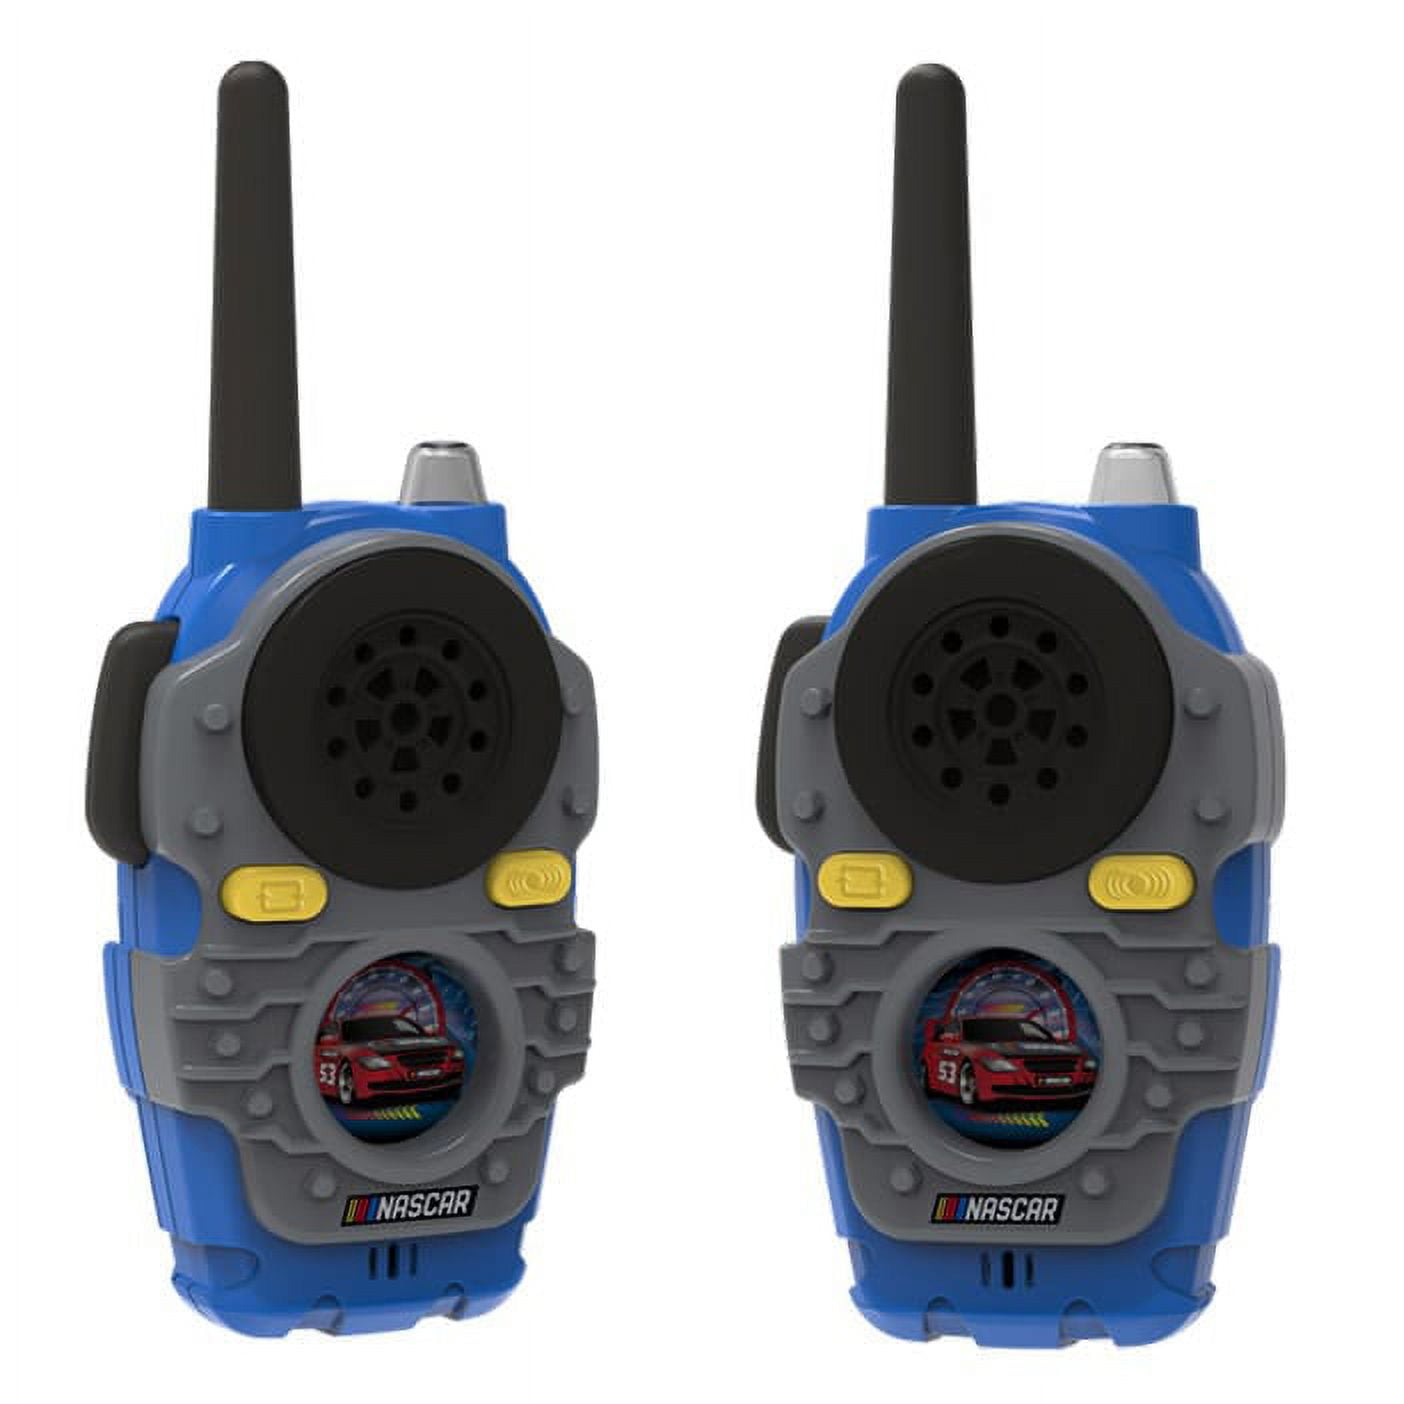 NASCAR Lights and Sounds Walkie Talkies